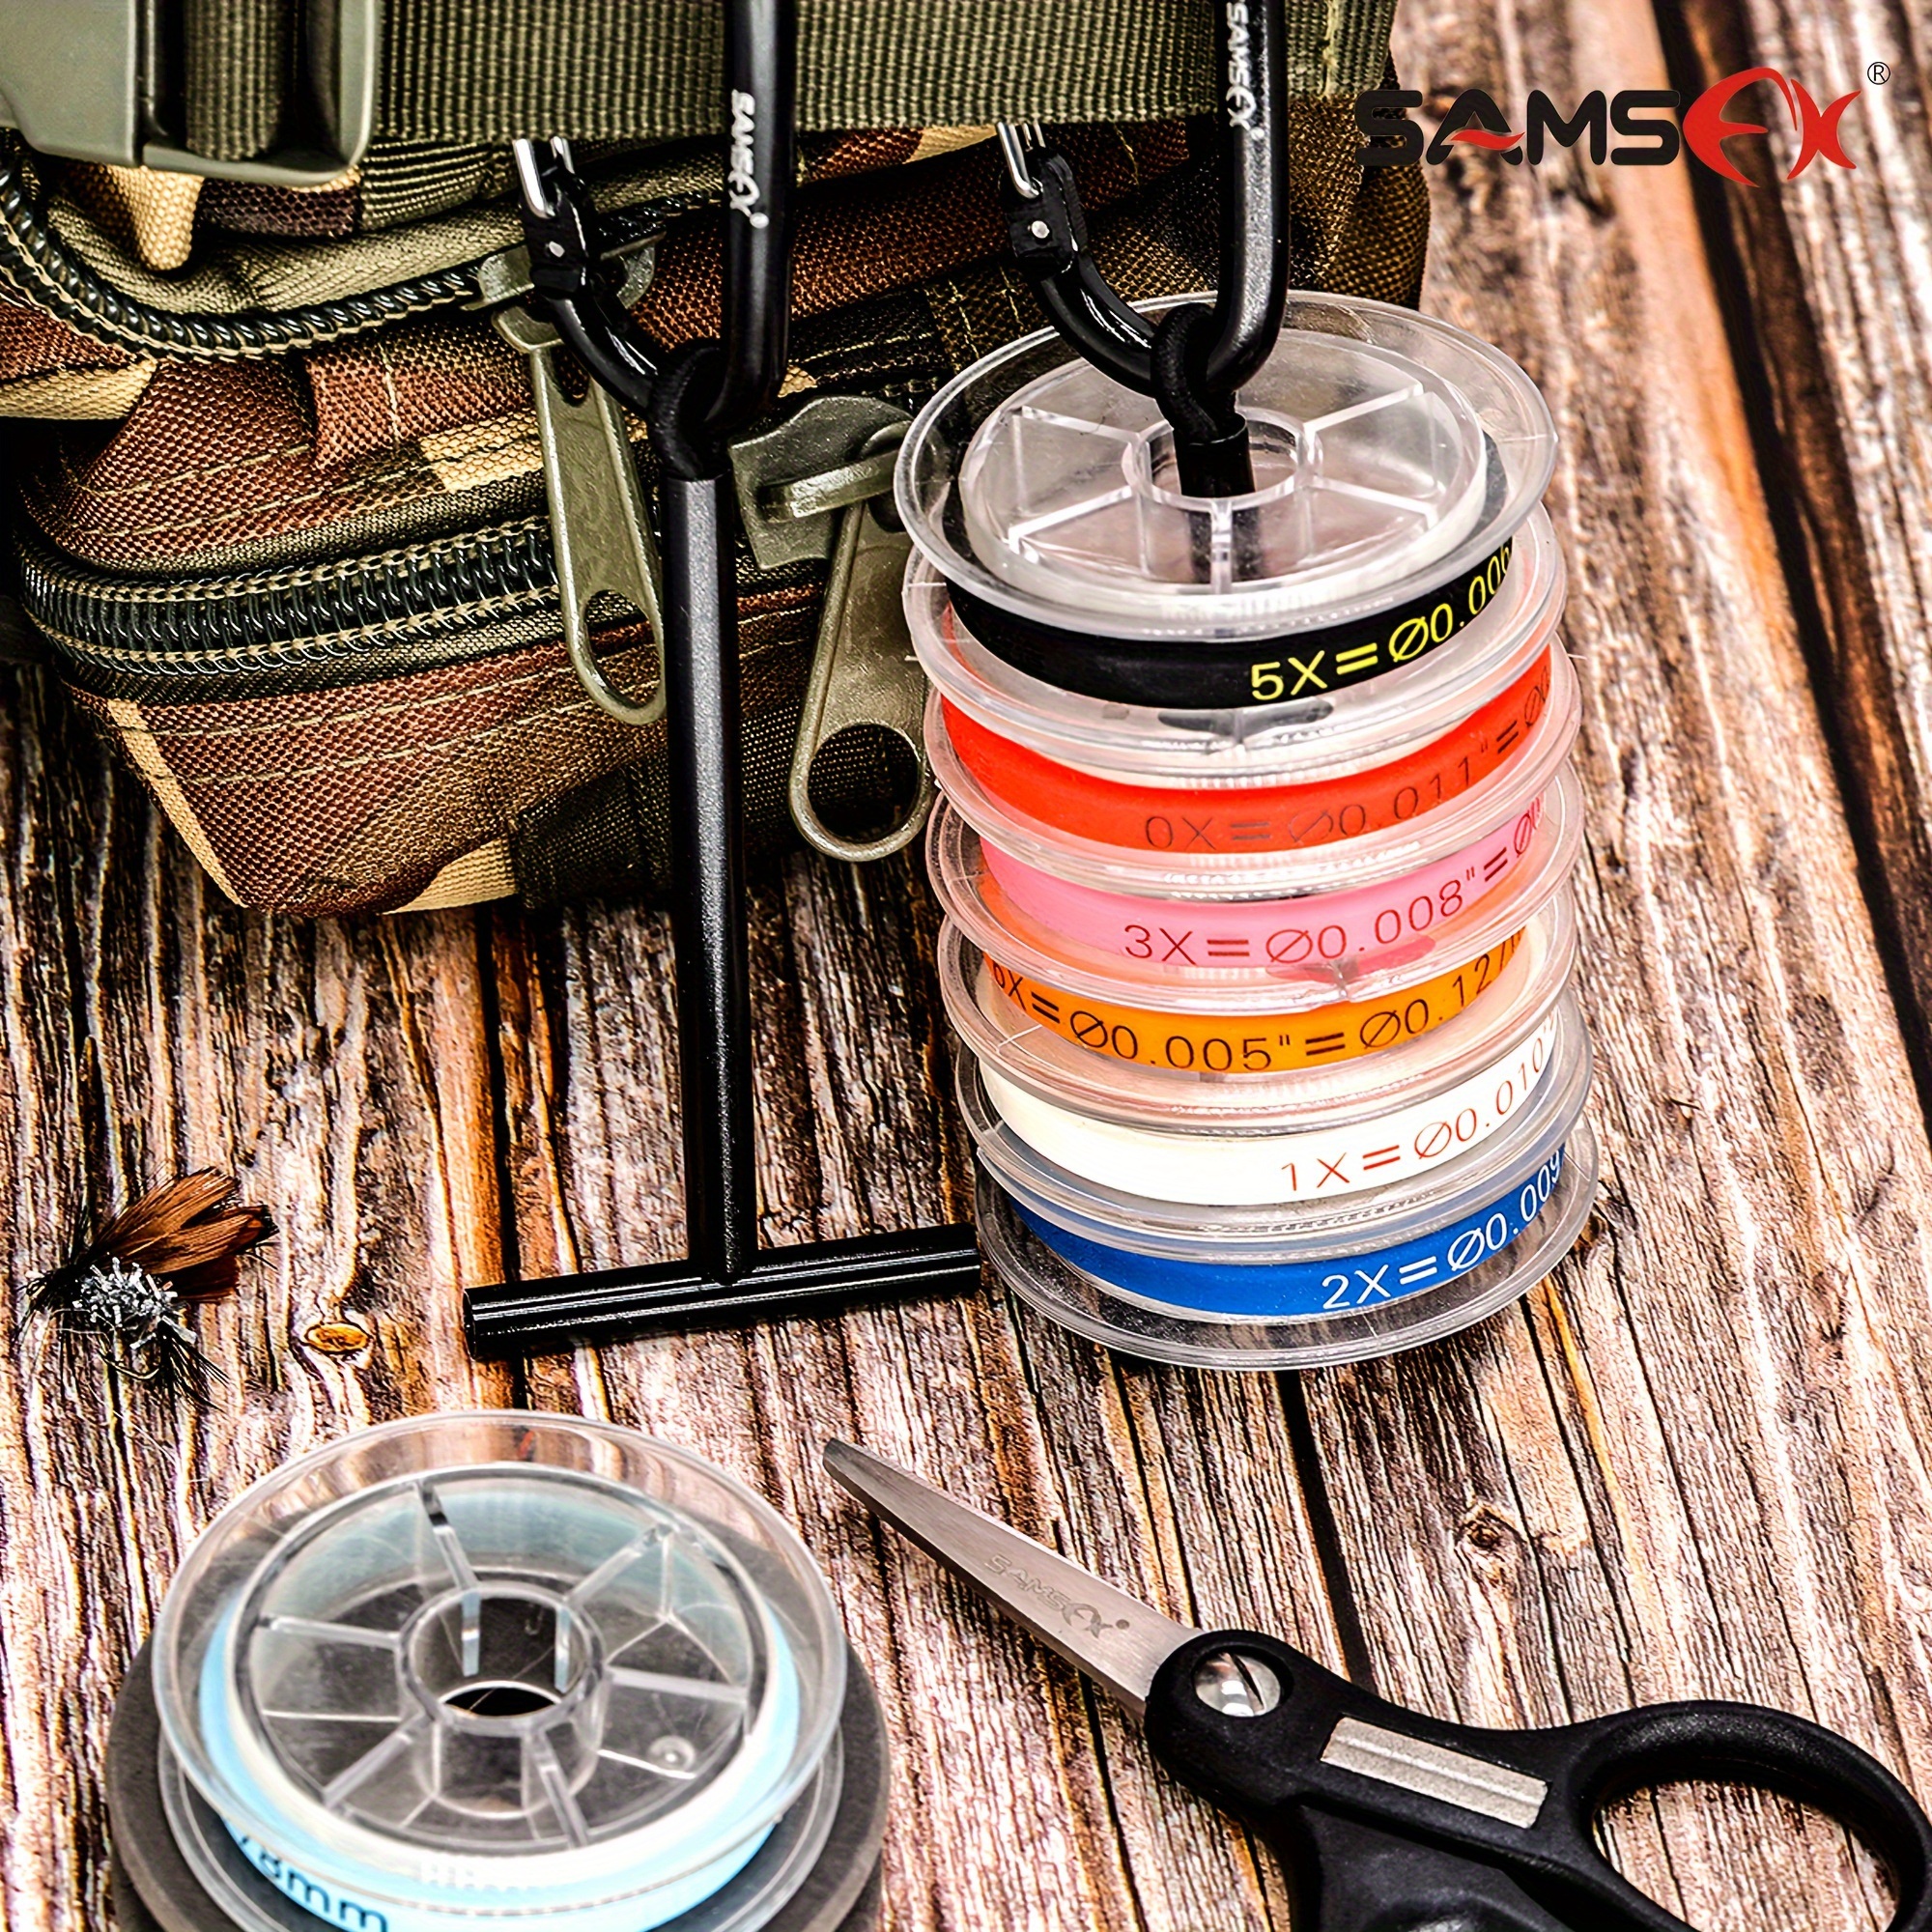 2pcs/set SAMSFX Fishing Tippet Holders With Carabiner Clip, Fly Fishing  Tackle, Portable Tippet Line Organizer, Angler Tippet Spool Holder